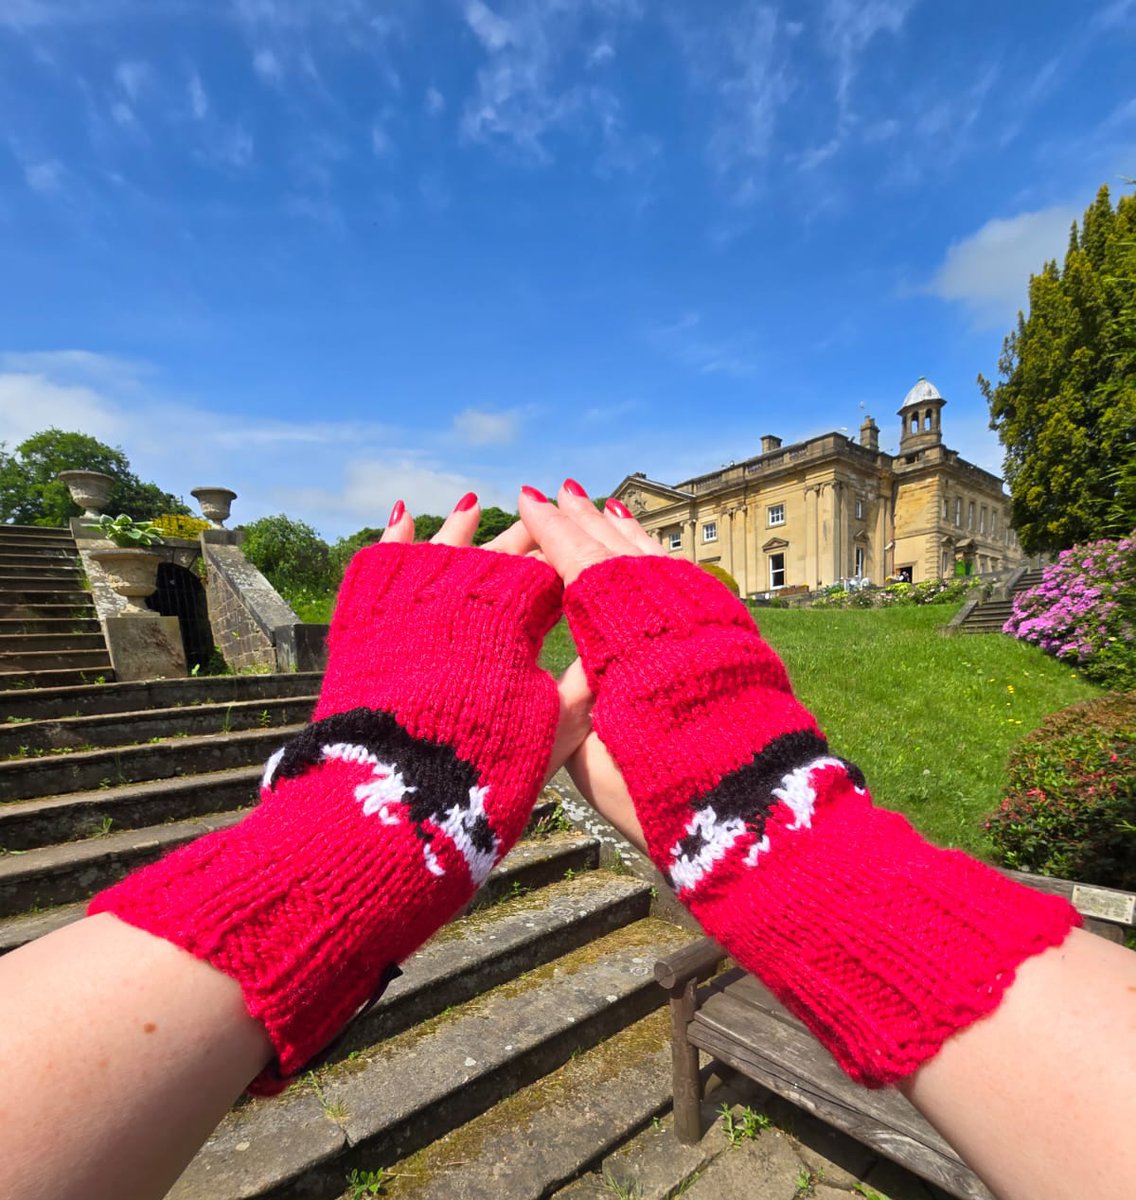 I love this photo my daughter took of my knitted Collie Dog wristwarmers ❤️